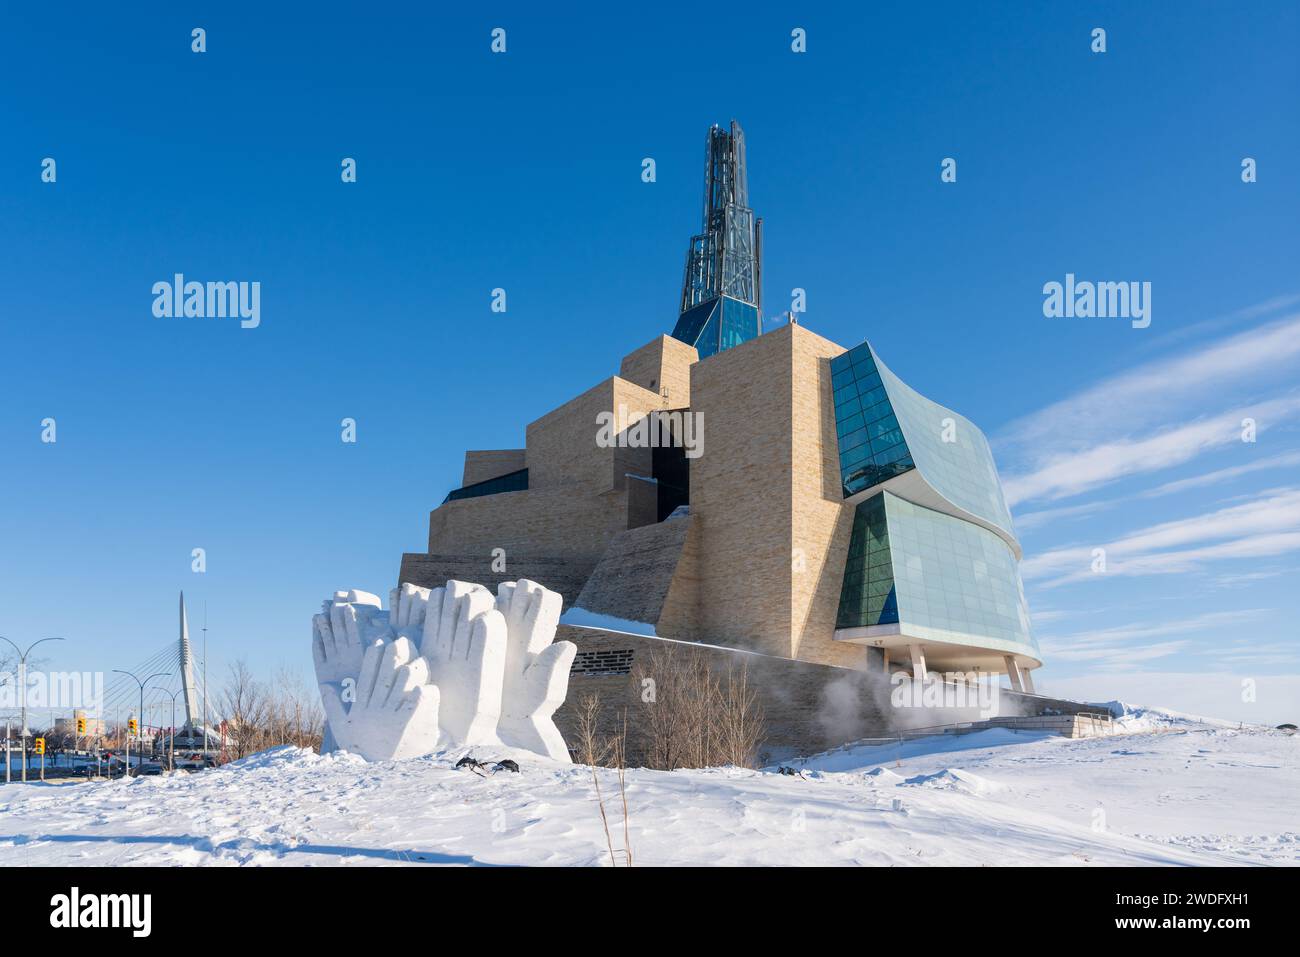 The Canadian Museum for Human Rights and snow sculptures at the Festival du Voyageur in Winnipeg, Manitoba, Canada. Stock Photo